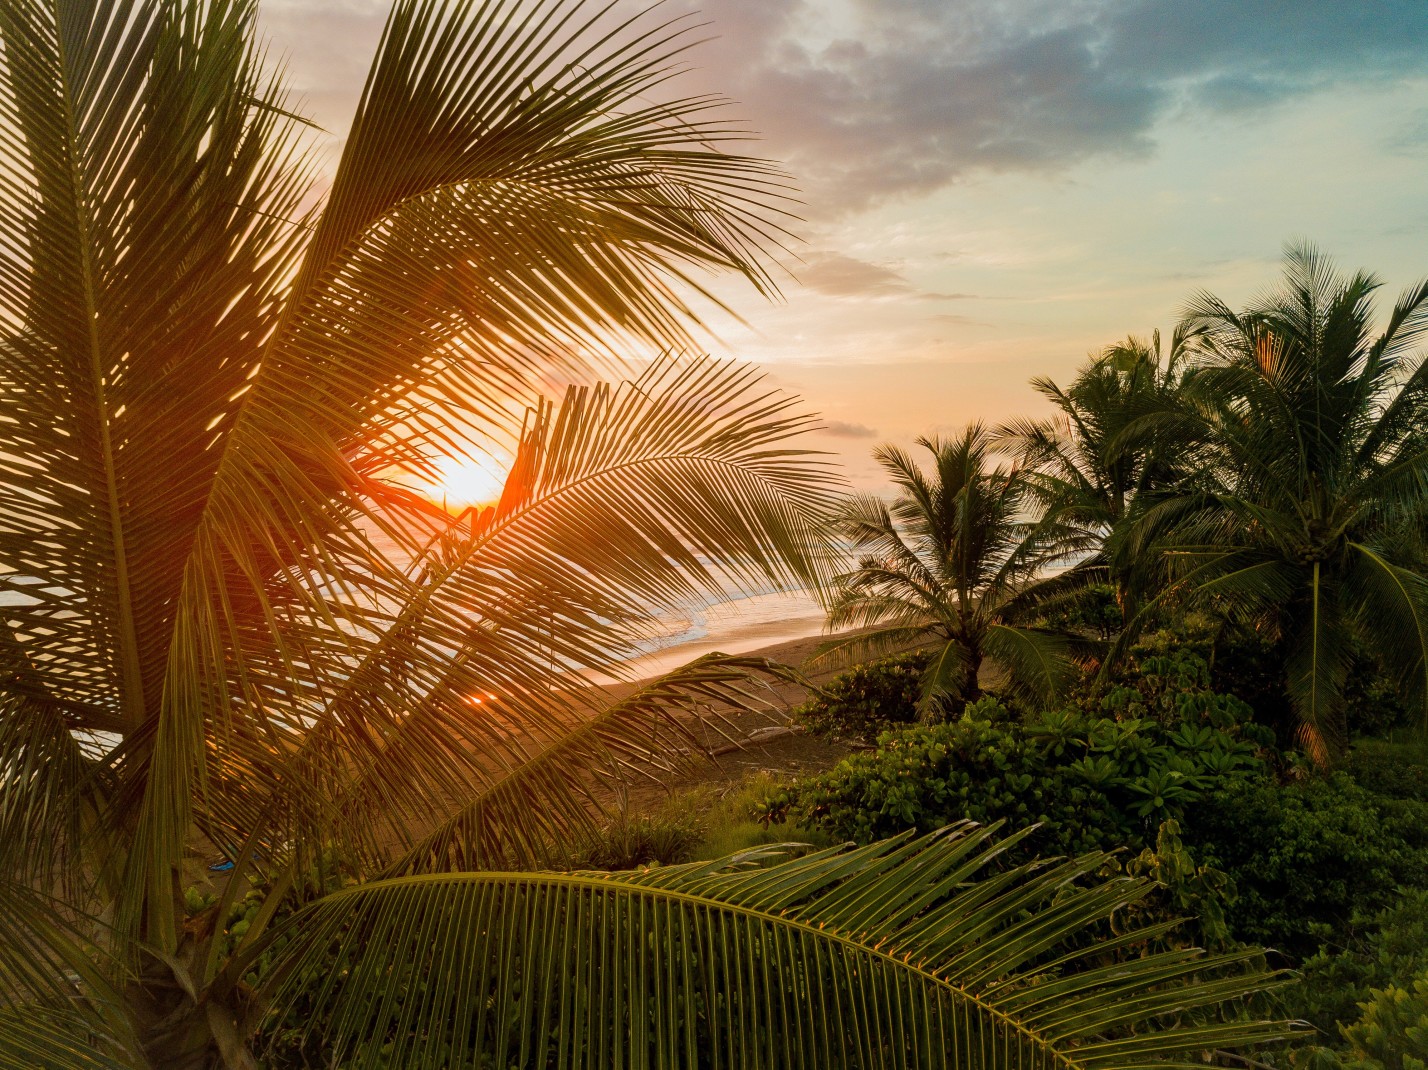 Costa Rica sunset with lush nature and palm trees at the beach. 